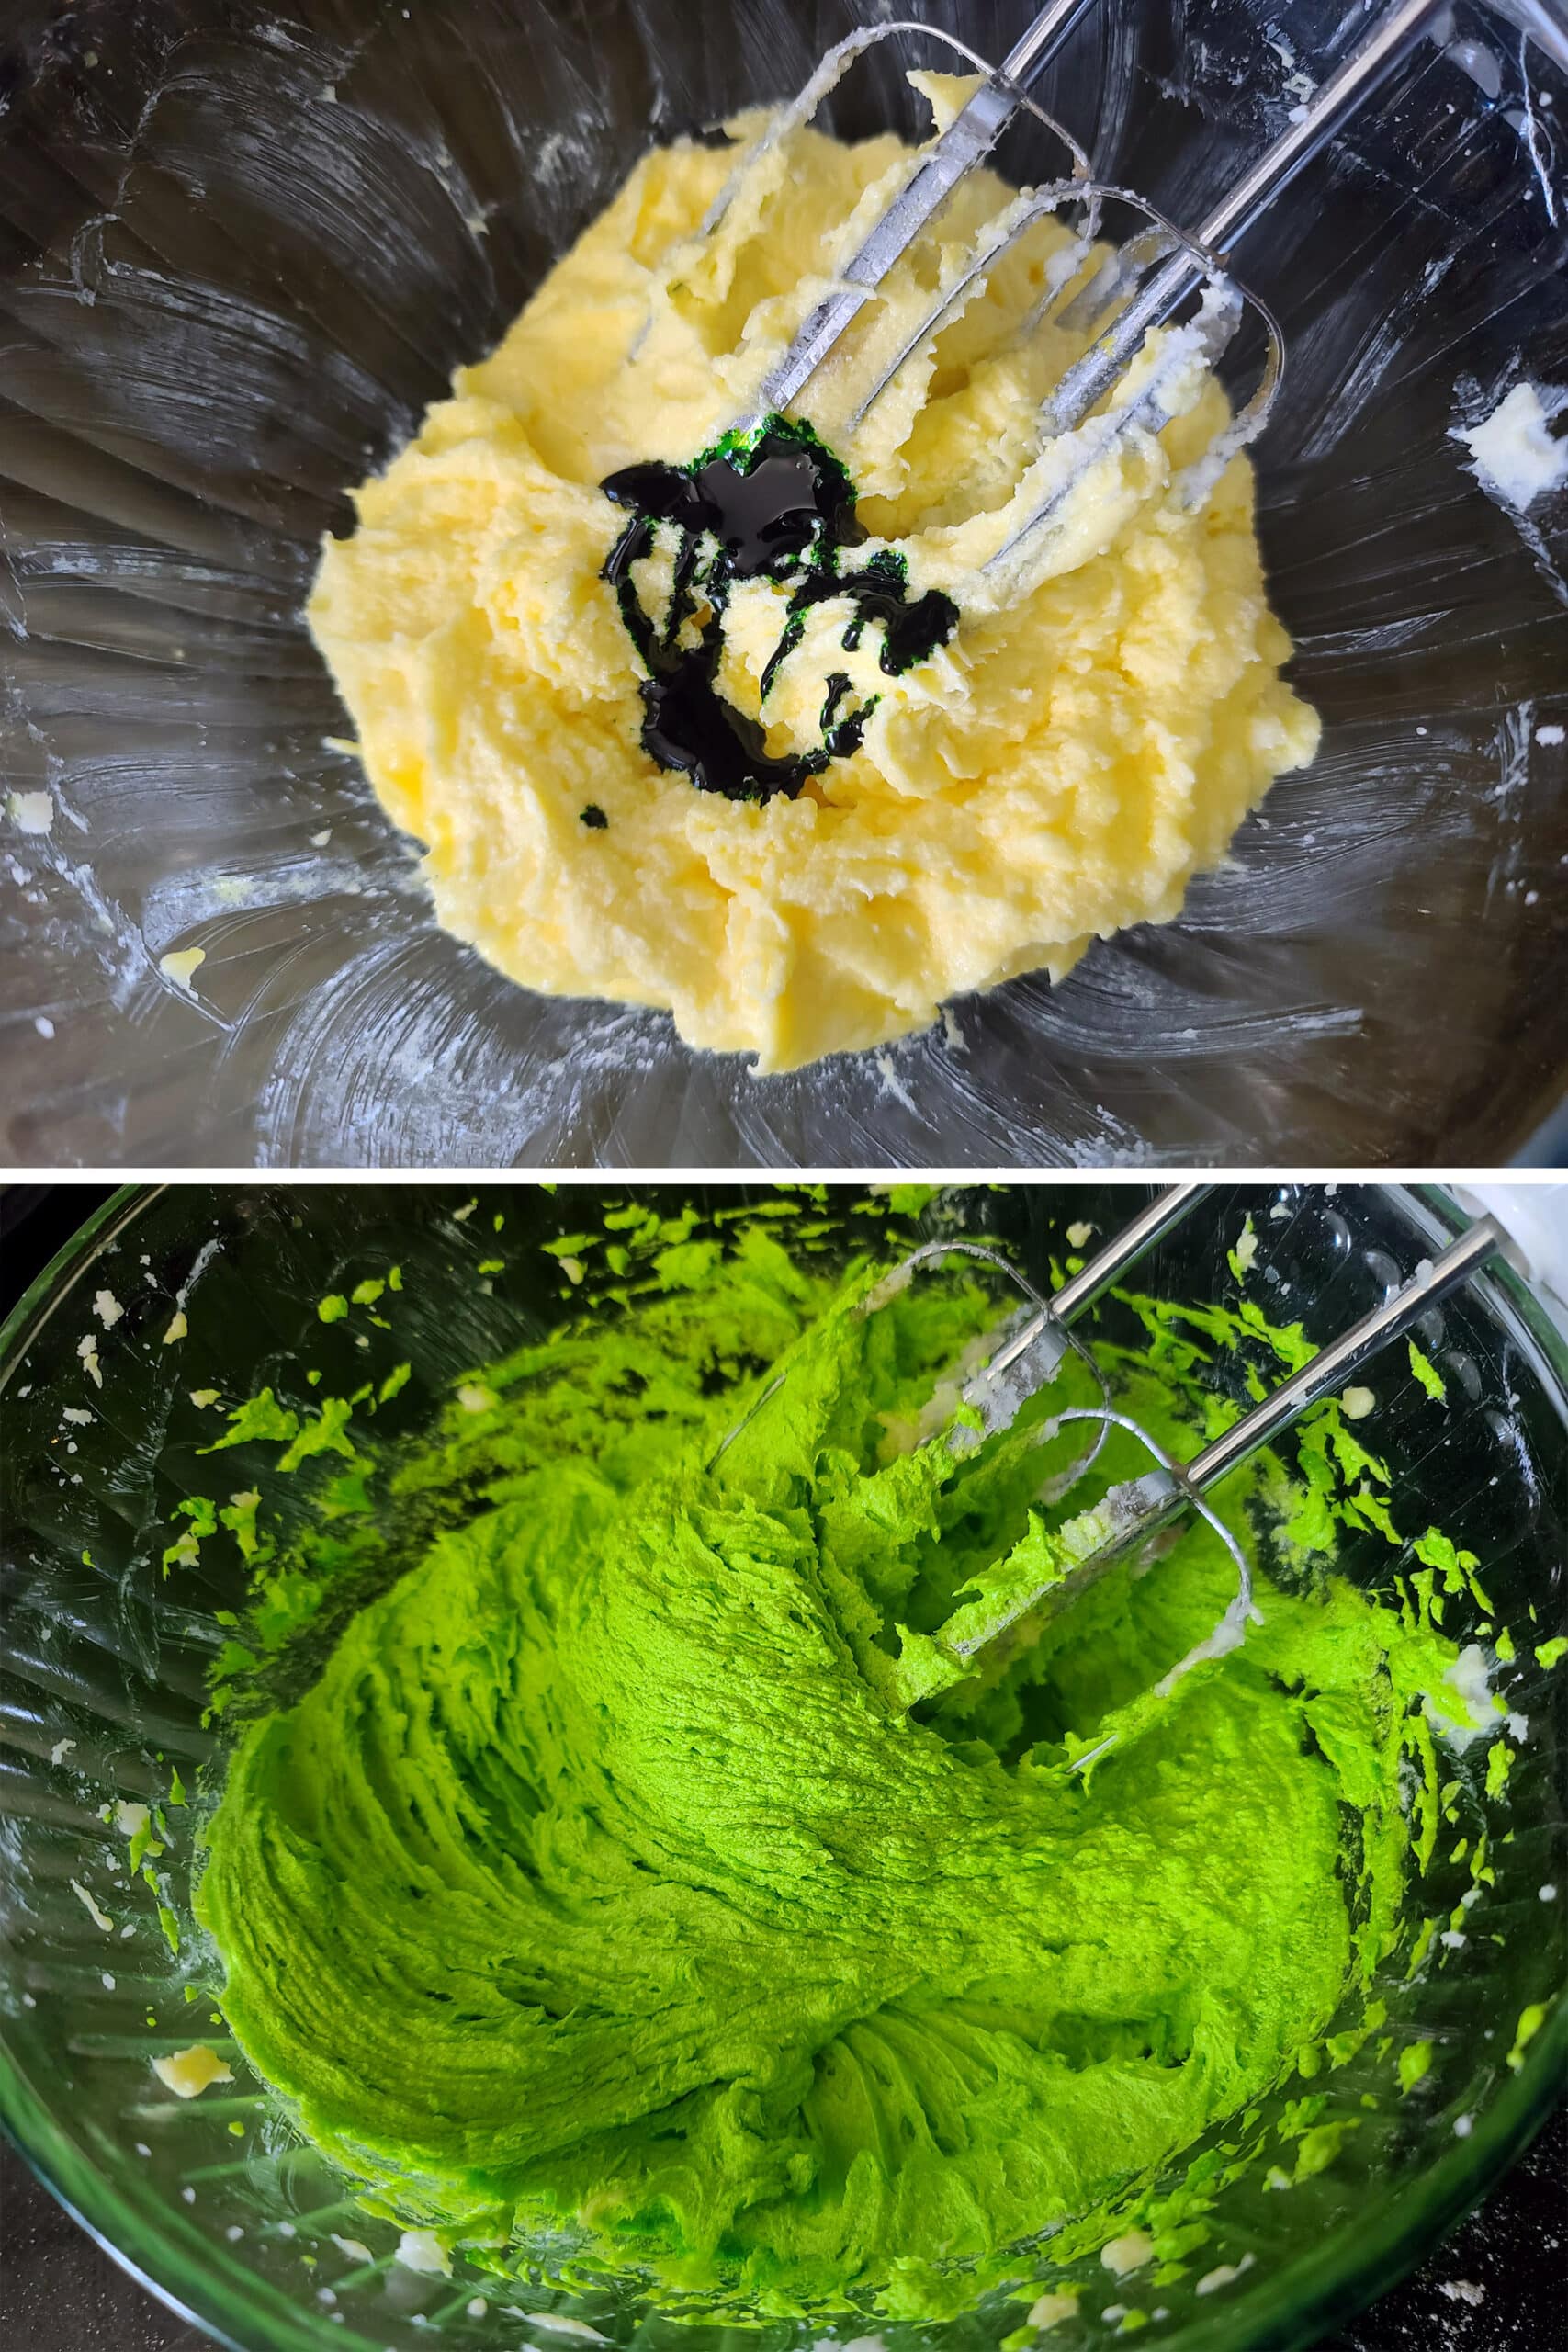 2 part image showing green gel food colouring being used to tint the gluten-free cookie dough bright green.